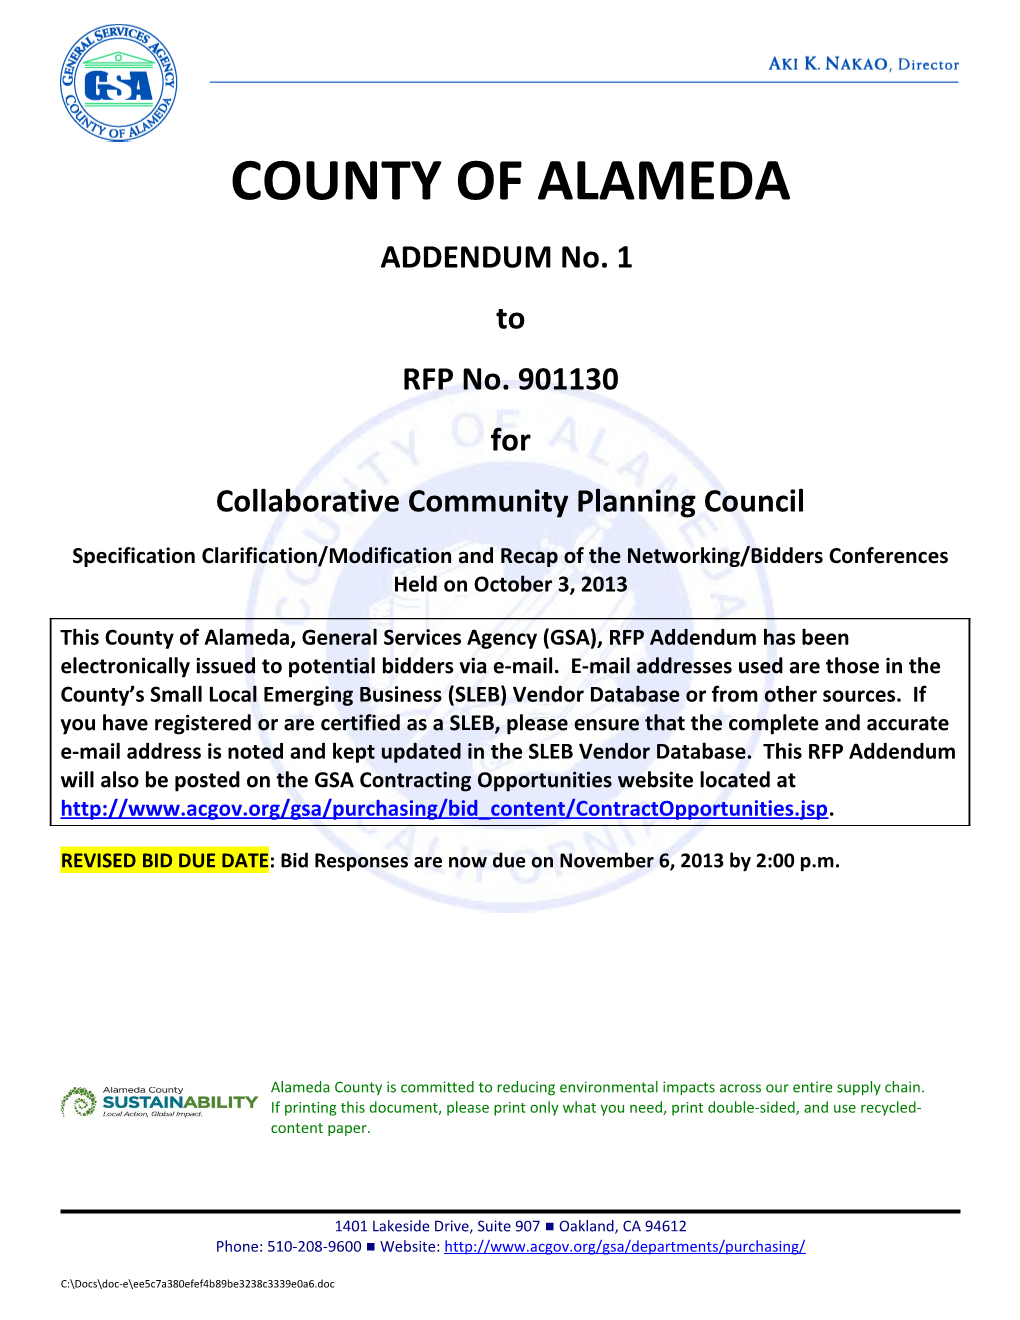 901130 Addendum 1 for Collaborative Community Planning Council